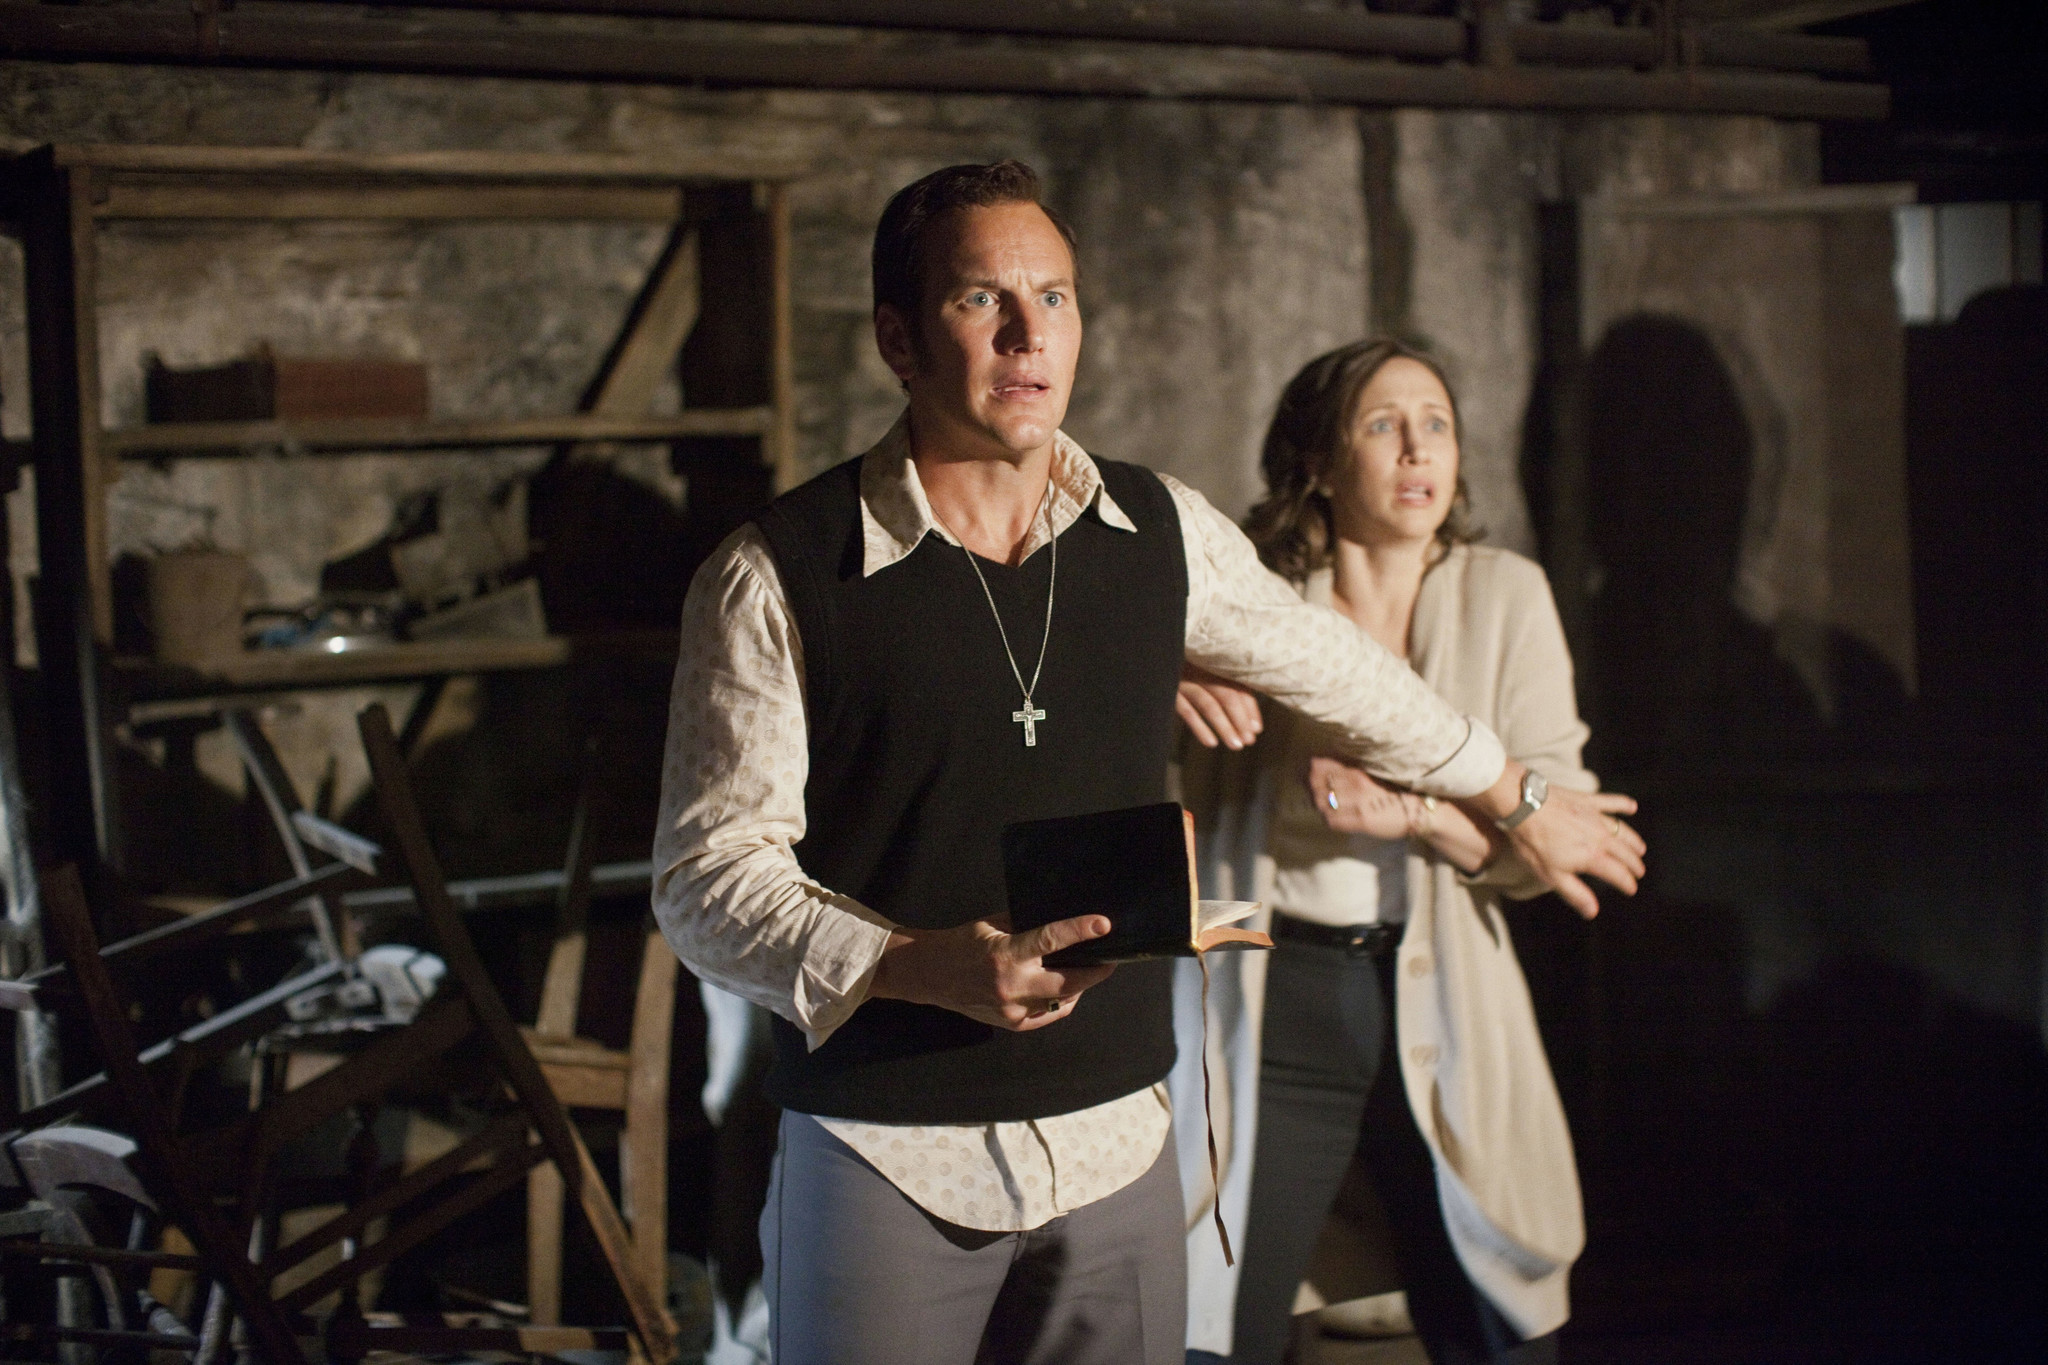 The Conjuring 3: The Devil Made Me Do It' Is Based On A Real Life Connecticut Case. Here's What Really Happened